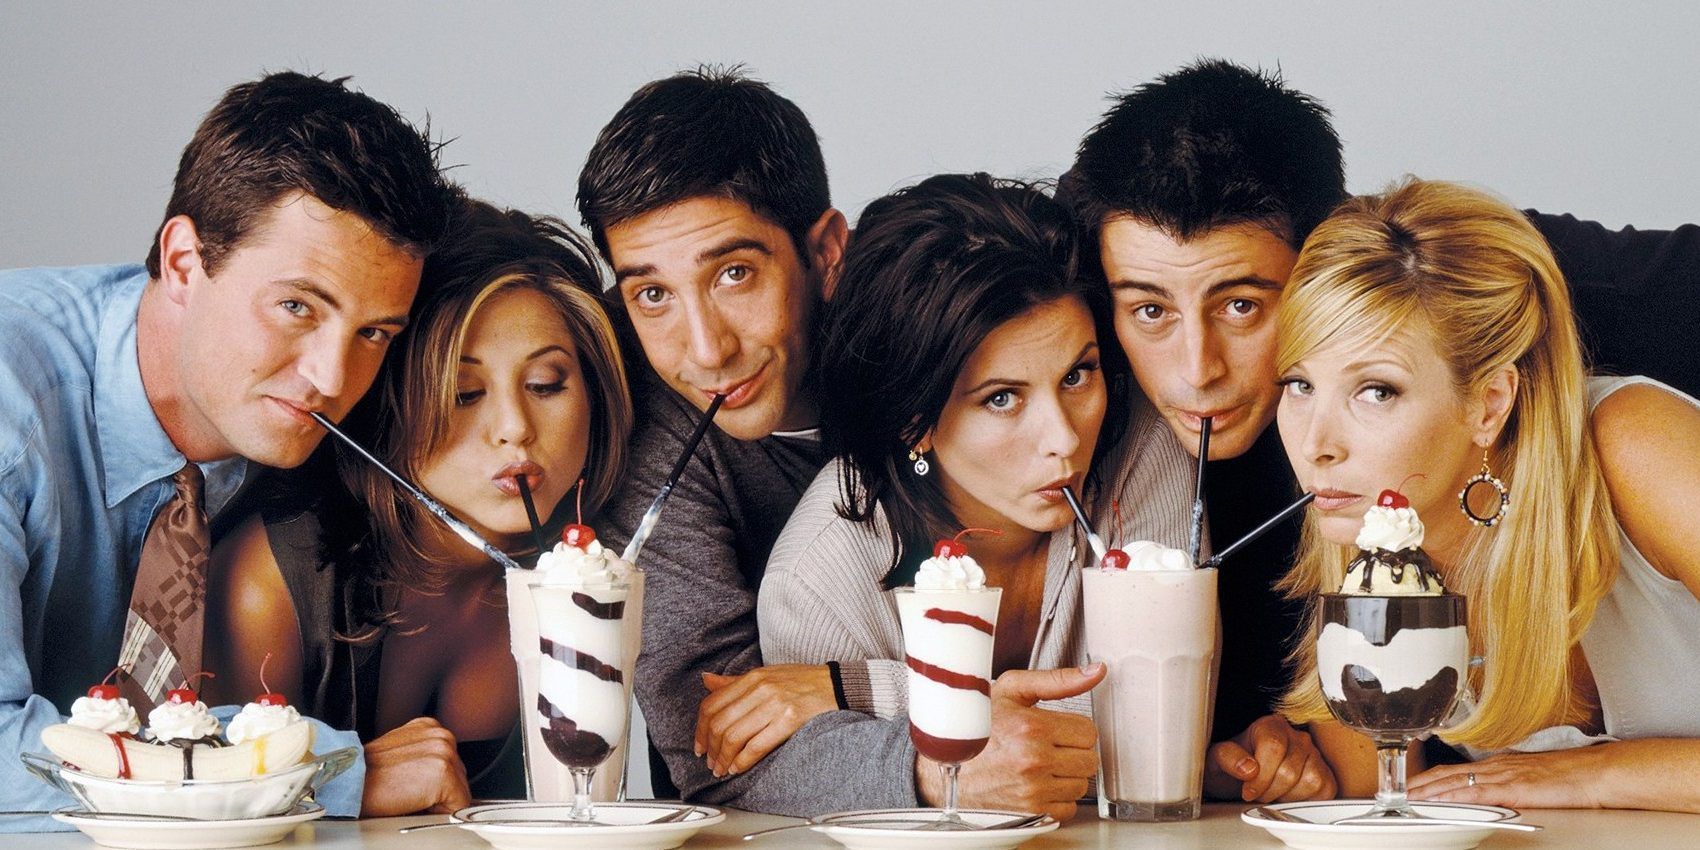 The cast of Friends sipping milkshakes